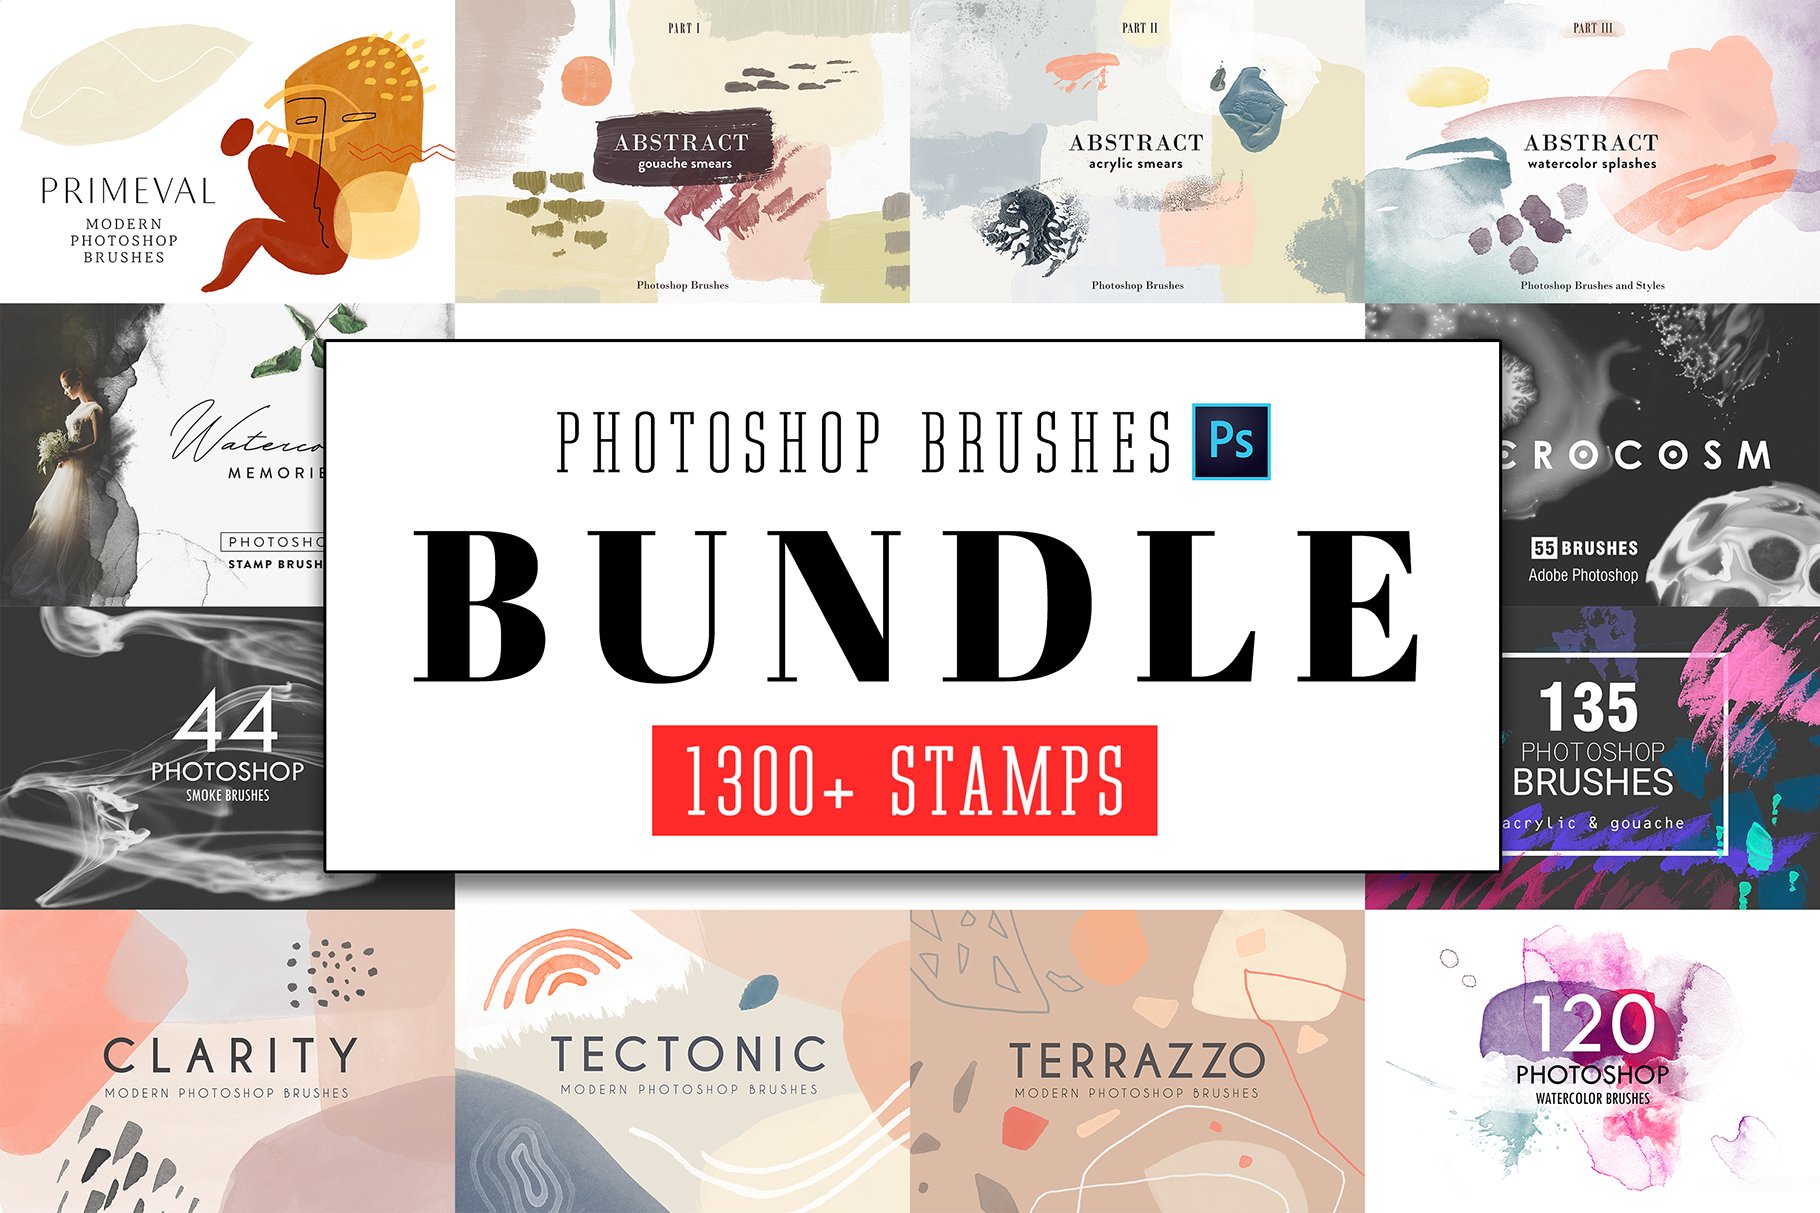 All Photoshop Stamp Brushes Bundlecover image.